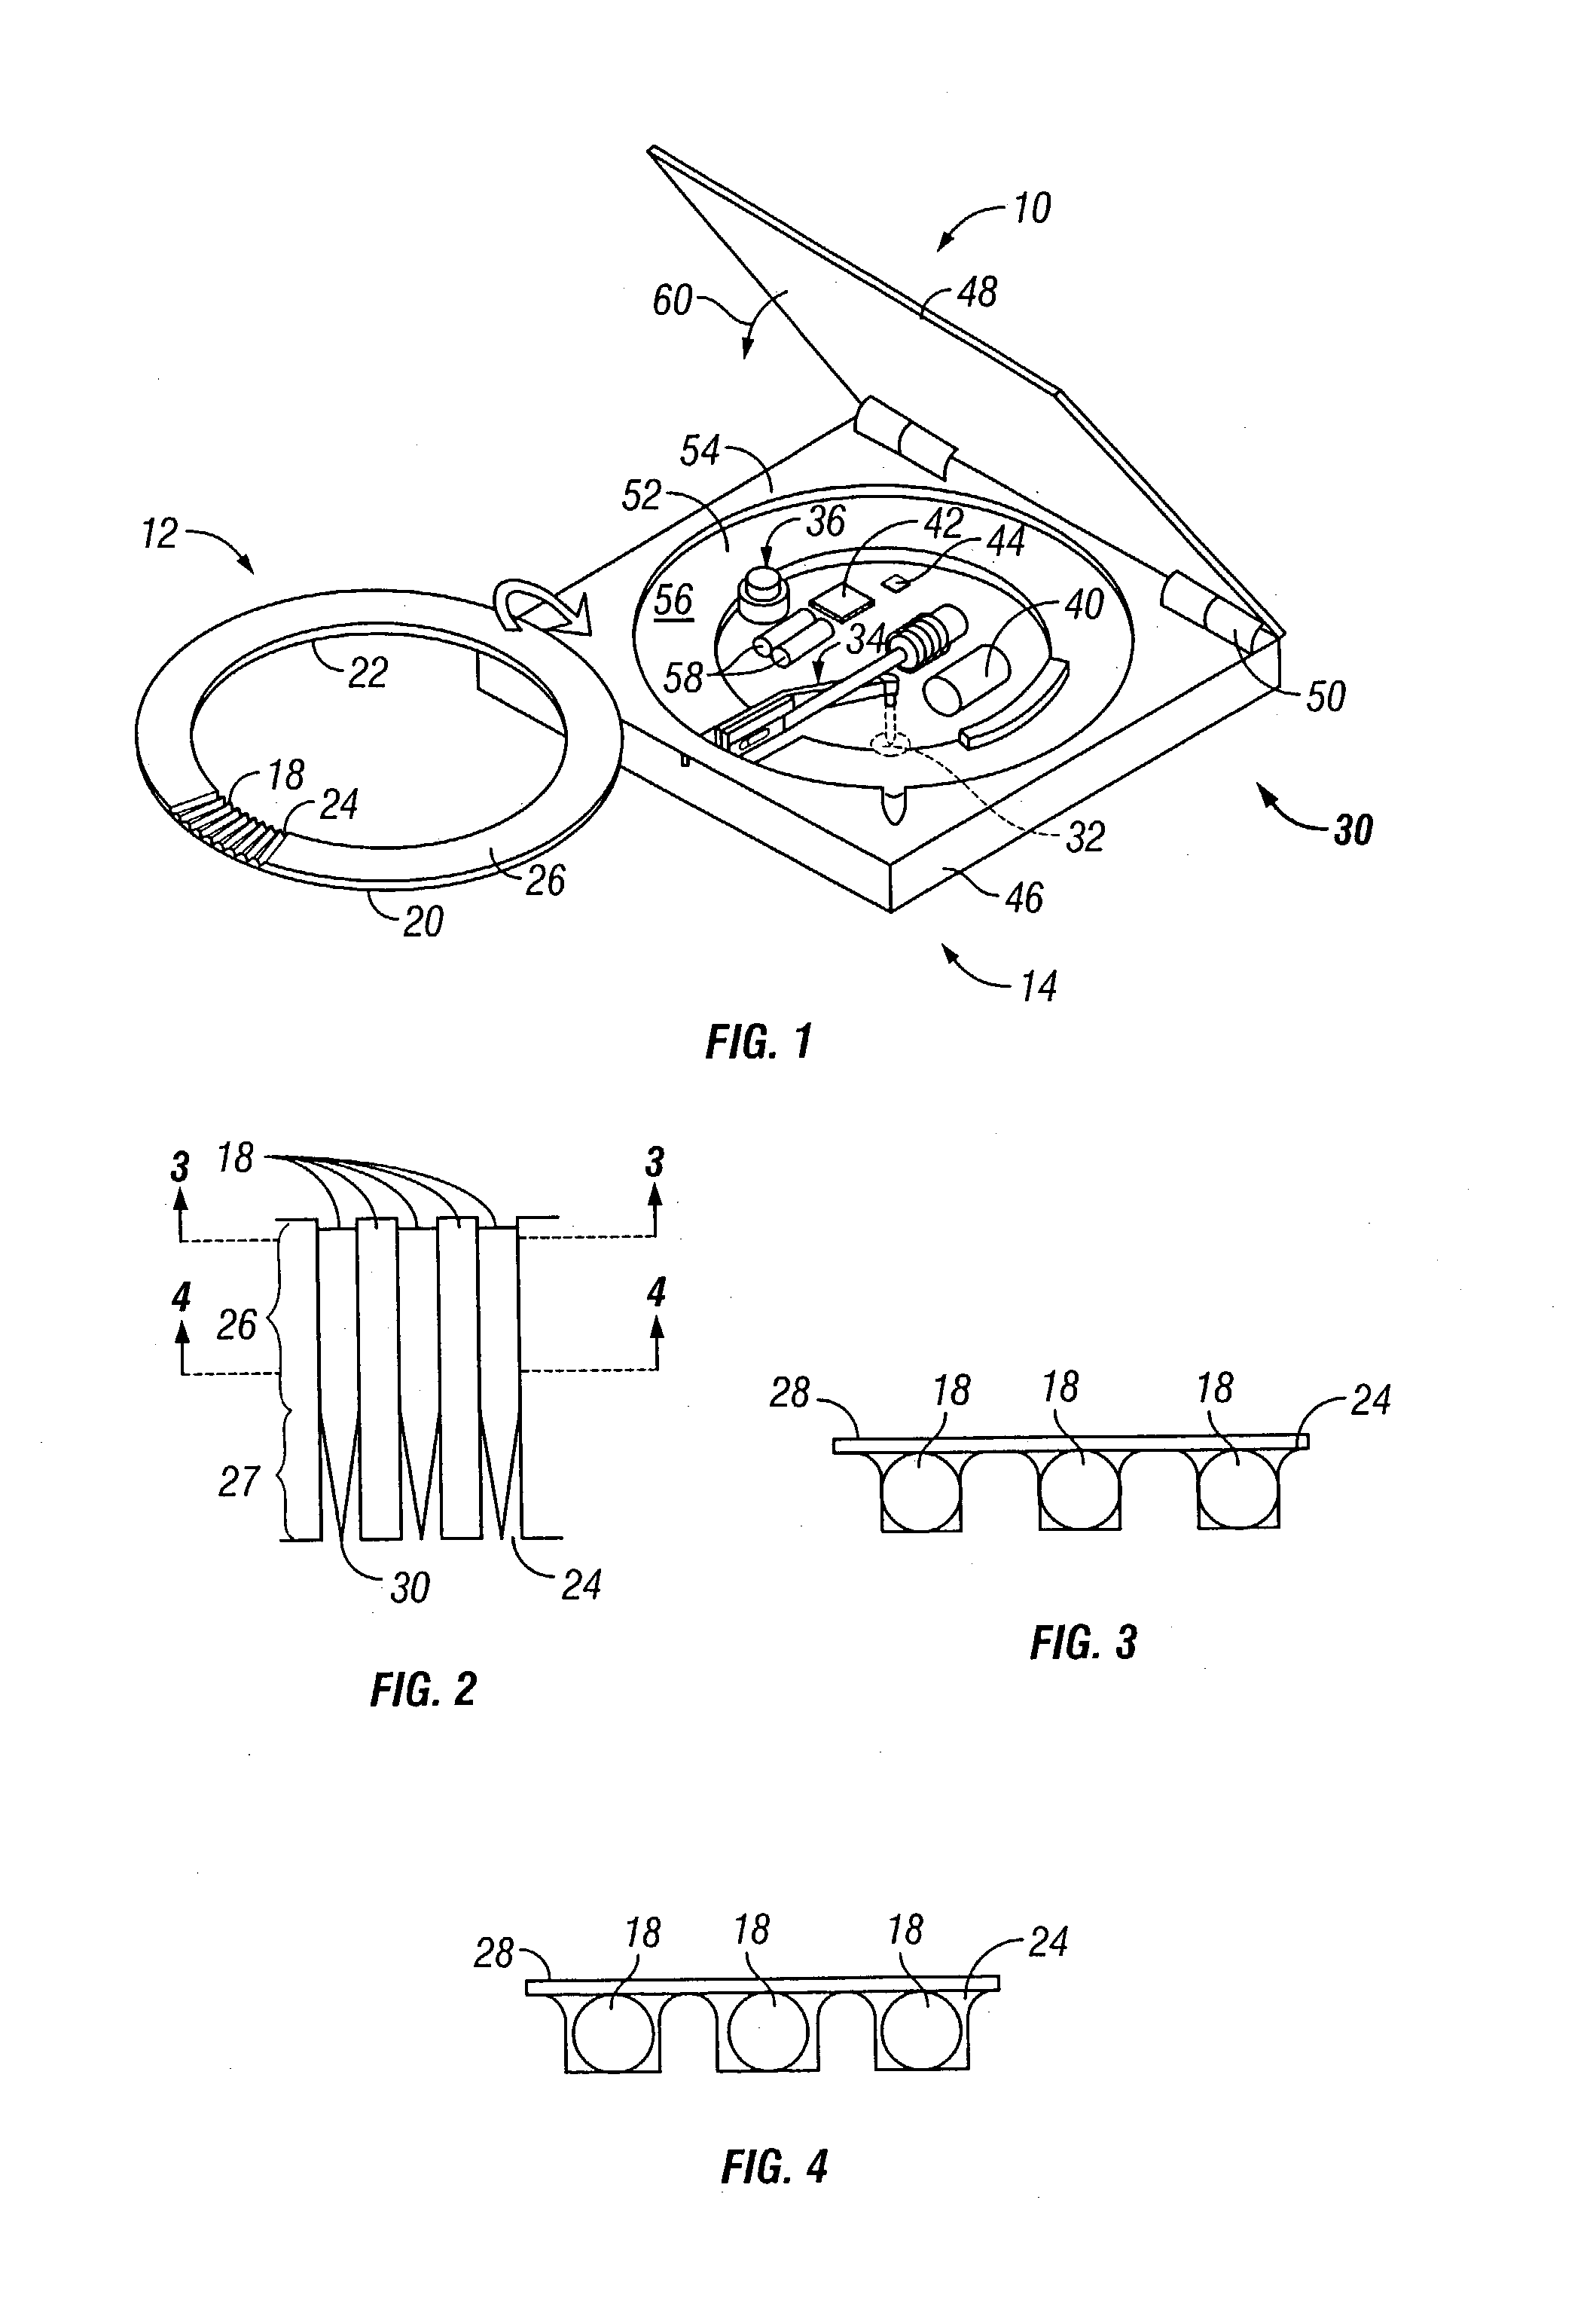 Method and apparatus for a multi-use body fluid sampling device with analyte sensing